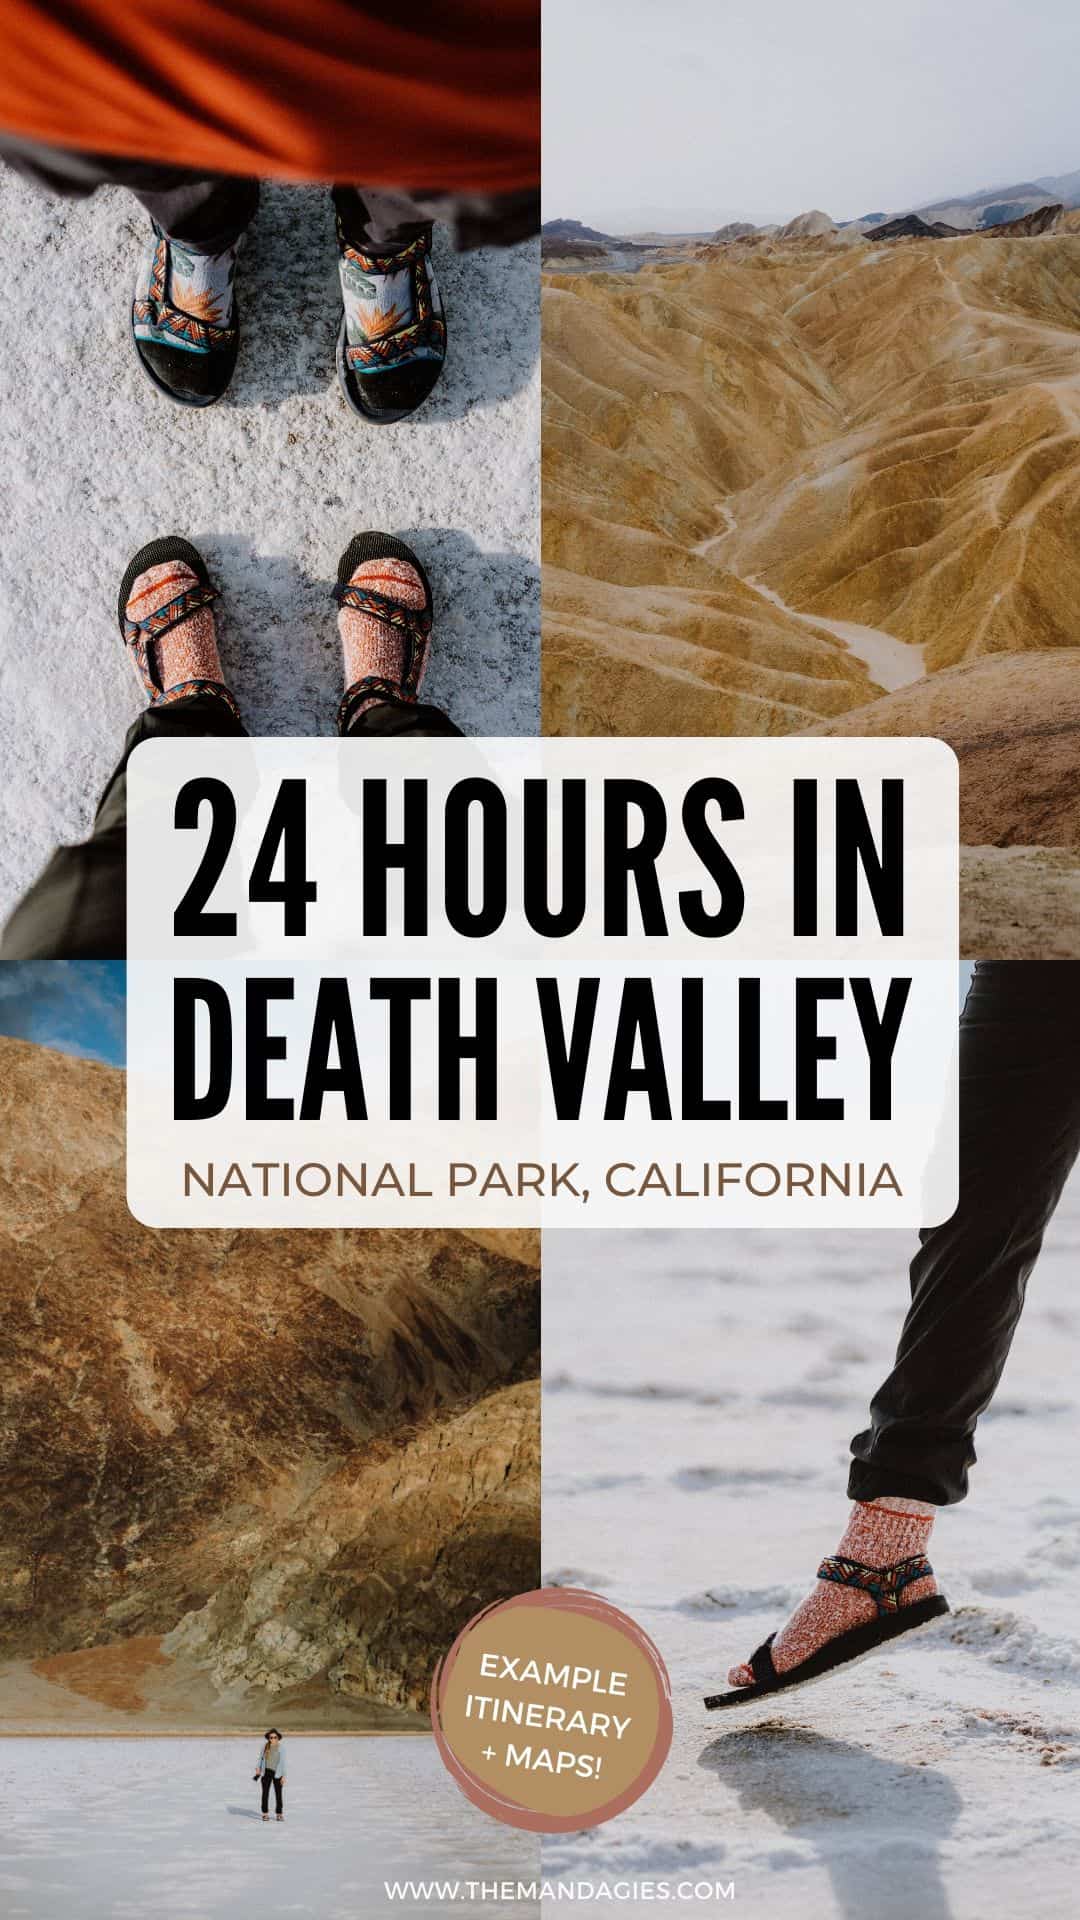 Want to explore death valley but don't have a lot of time? We're showing you how to explore Death Valley in one day! We're sharing epic stops like Zabriskie Point, Mesquite Sand Dunes, and Badwater Basin for a fun and quick trip to this Southern California desert. Save this post for your next Southwest road trip! #california #roadtrip #deathvalley #desert #deathvalleynationalpark #badwaterbasin #nature #photography #southerncalifornia